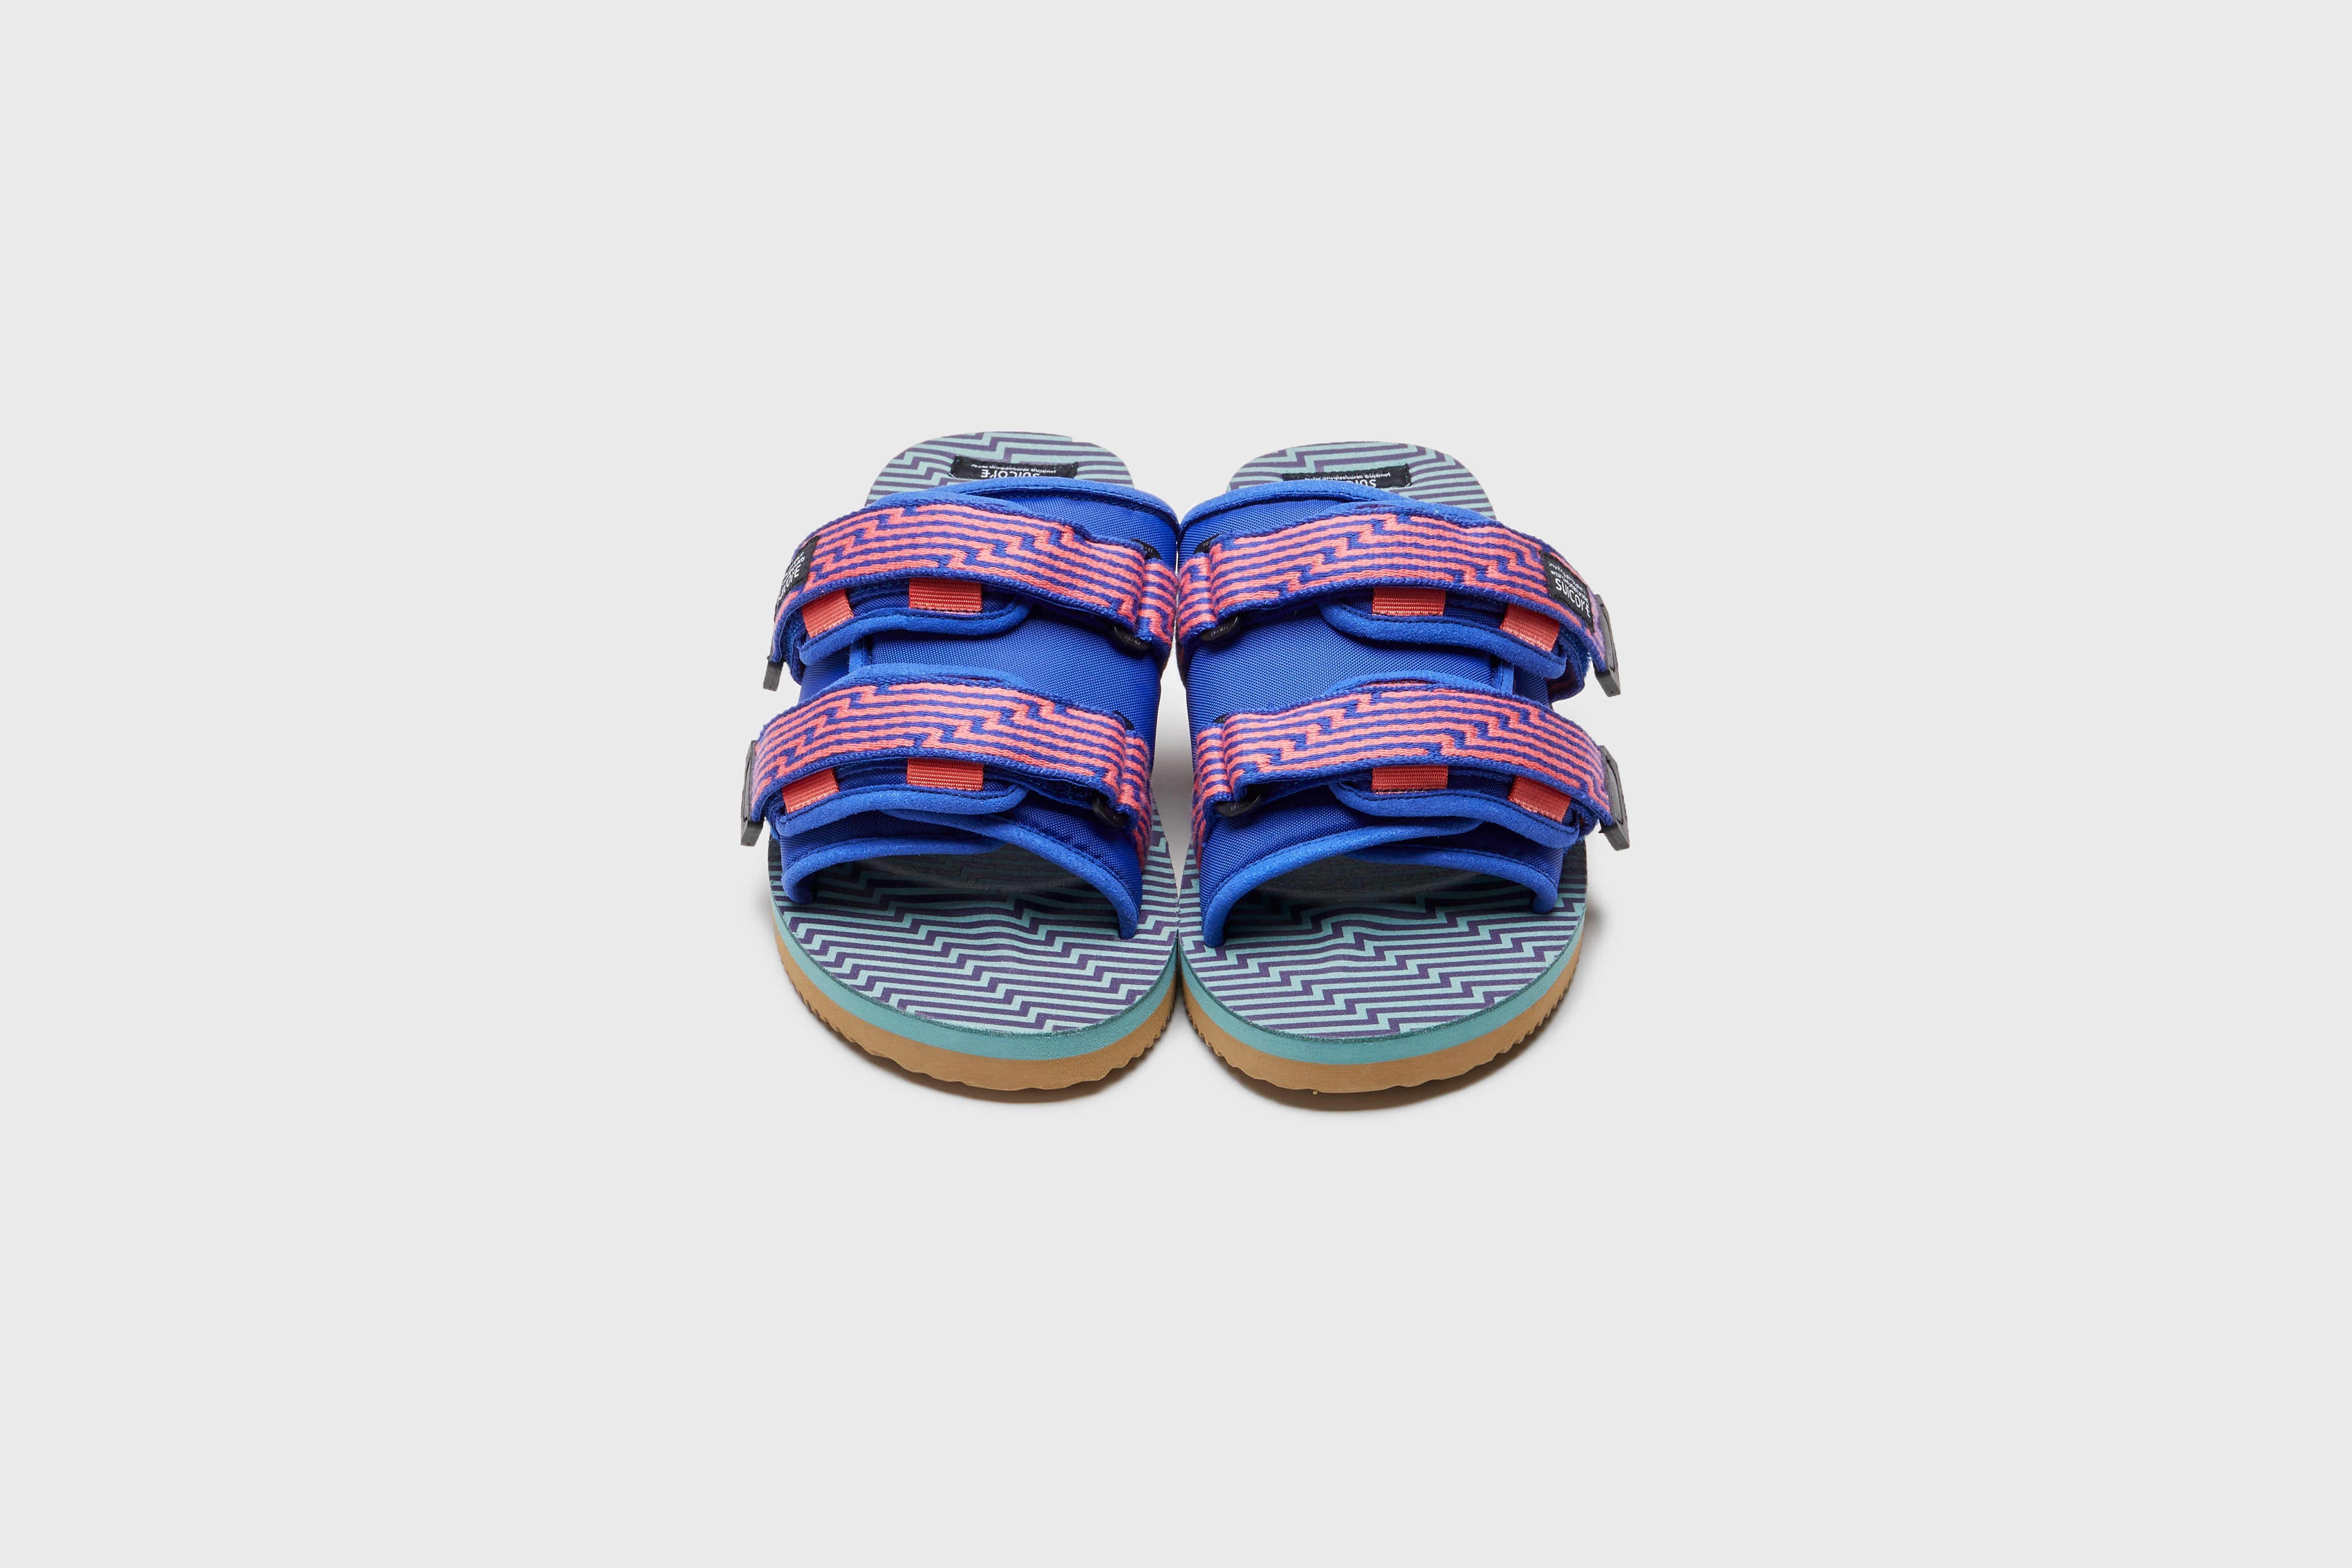 SUICOKE MOTO-JC01 slides with orange &amp; blue nylon upper, orange &amp; blue midsole and sole, strap and logo patch. From Spring/Summer 2023 collection on eightywingold Web Store, an official partner of SUICOKE. OG-056-JC01 ORANGE X BLUE